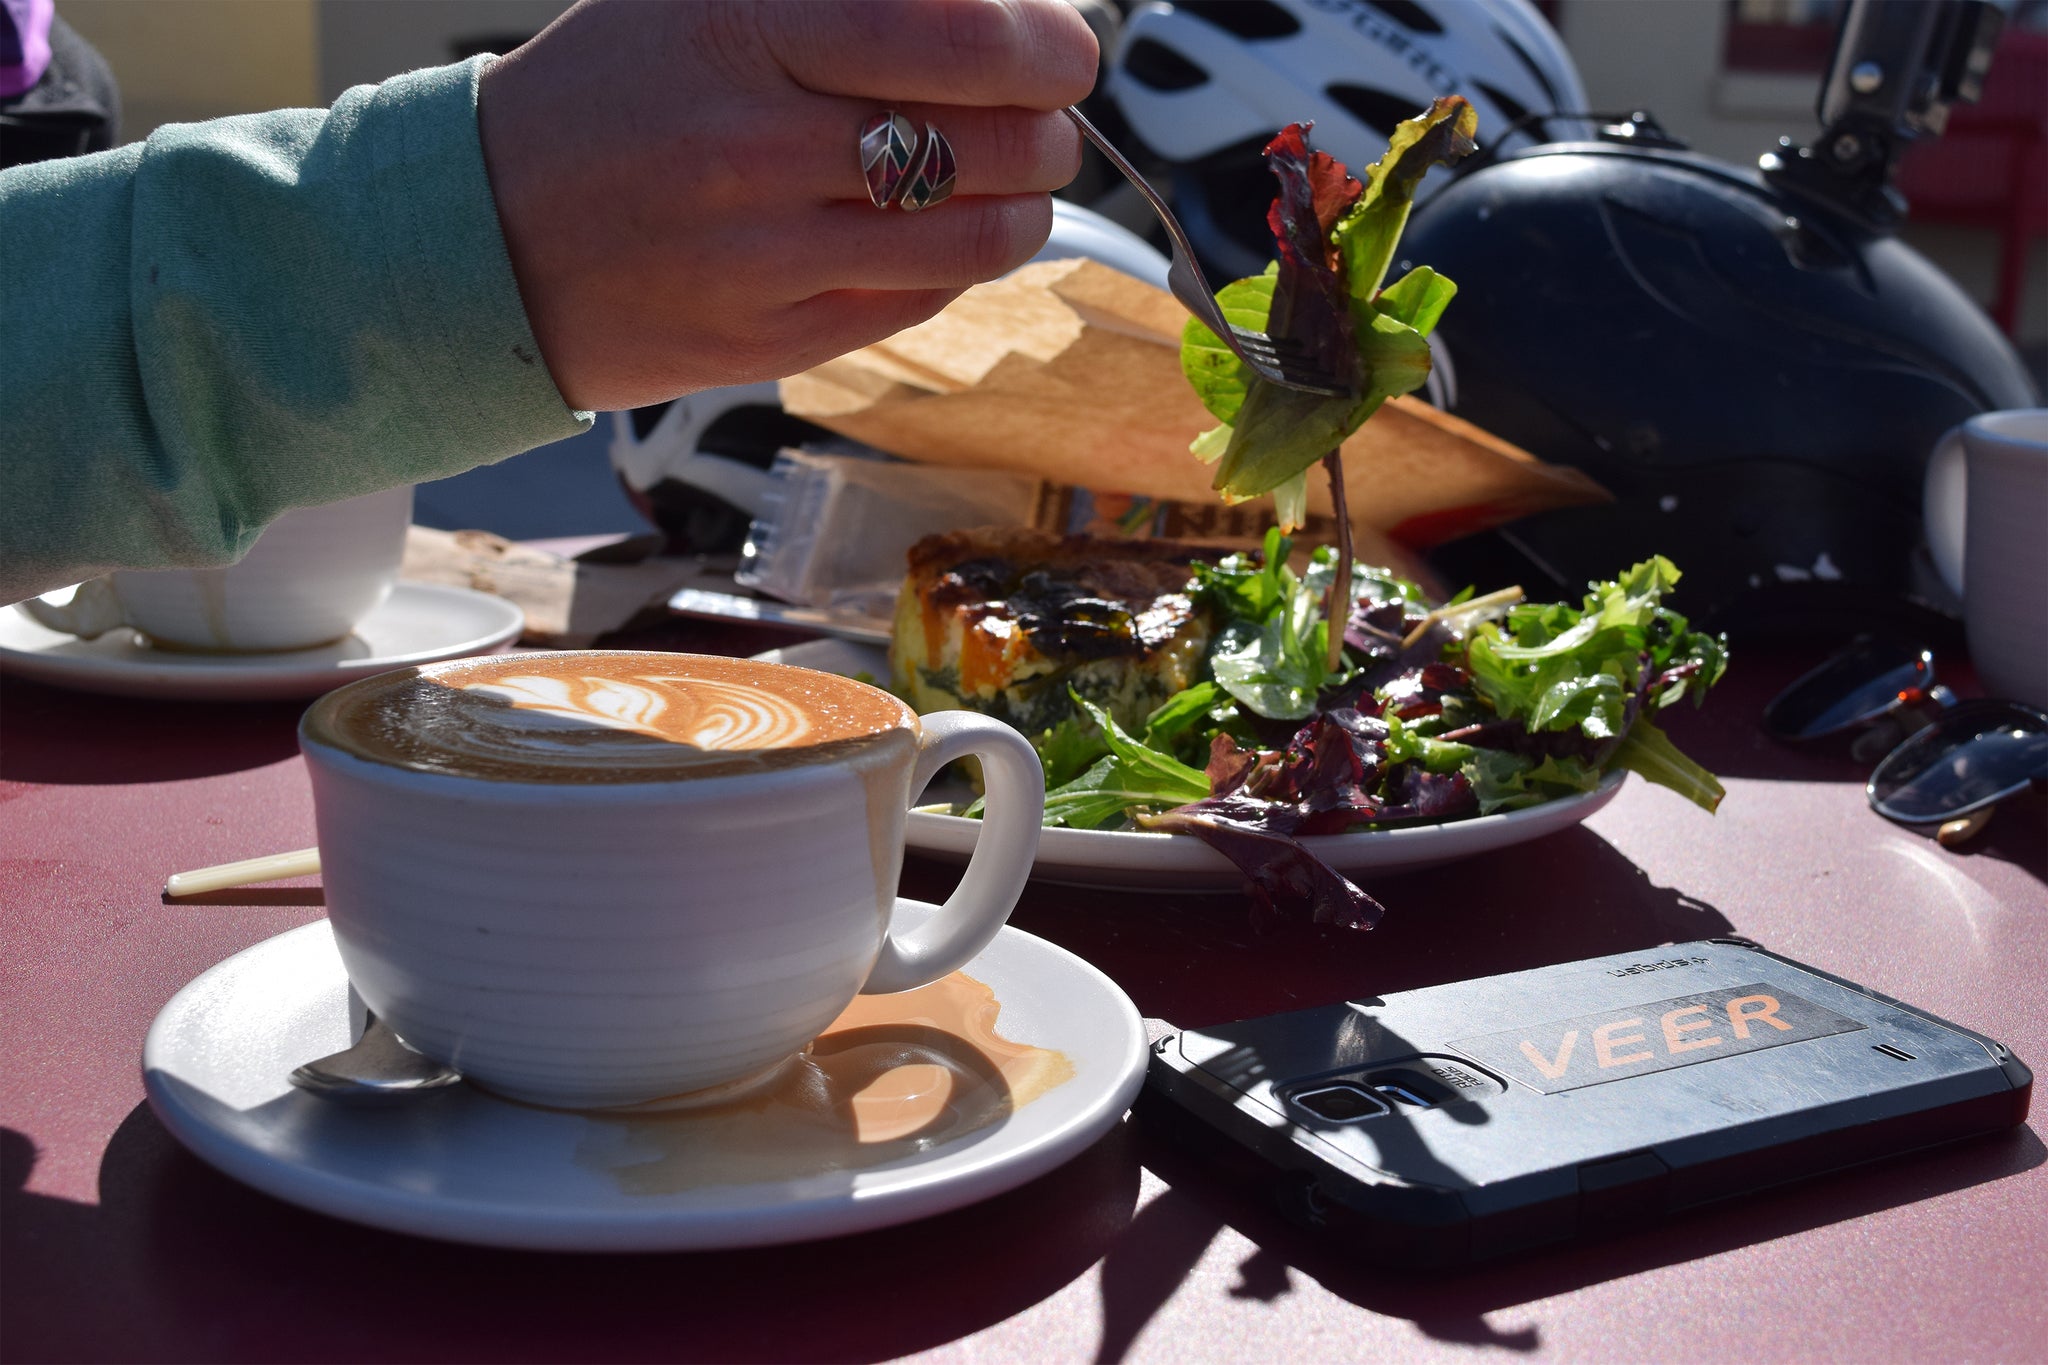 Equator Veggie Quiche and Cappuccino fueled VEER riders